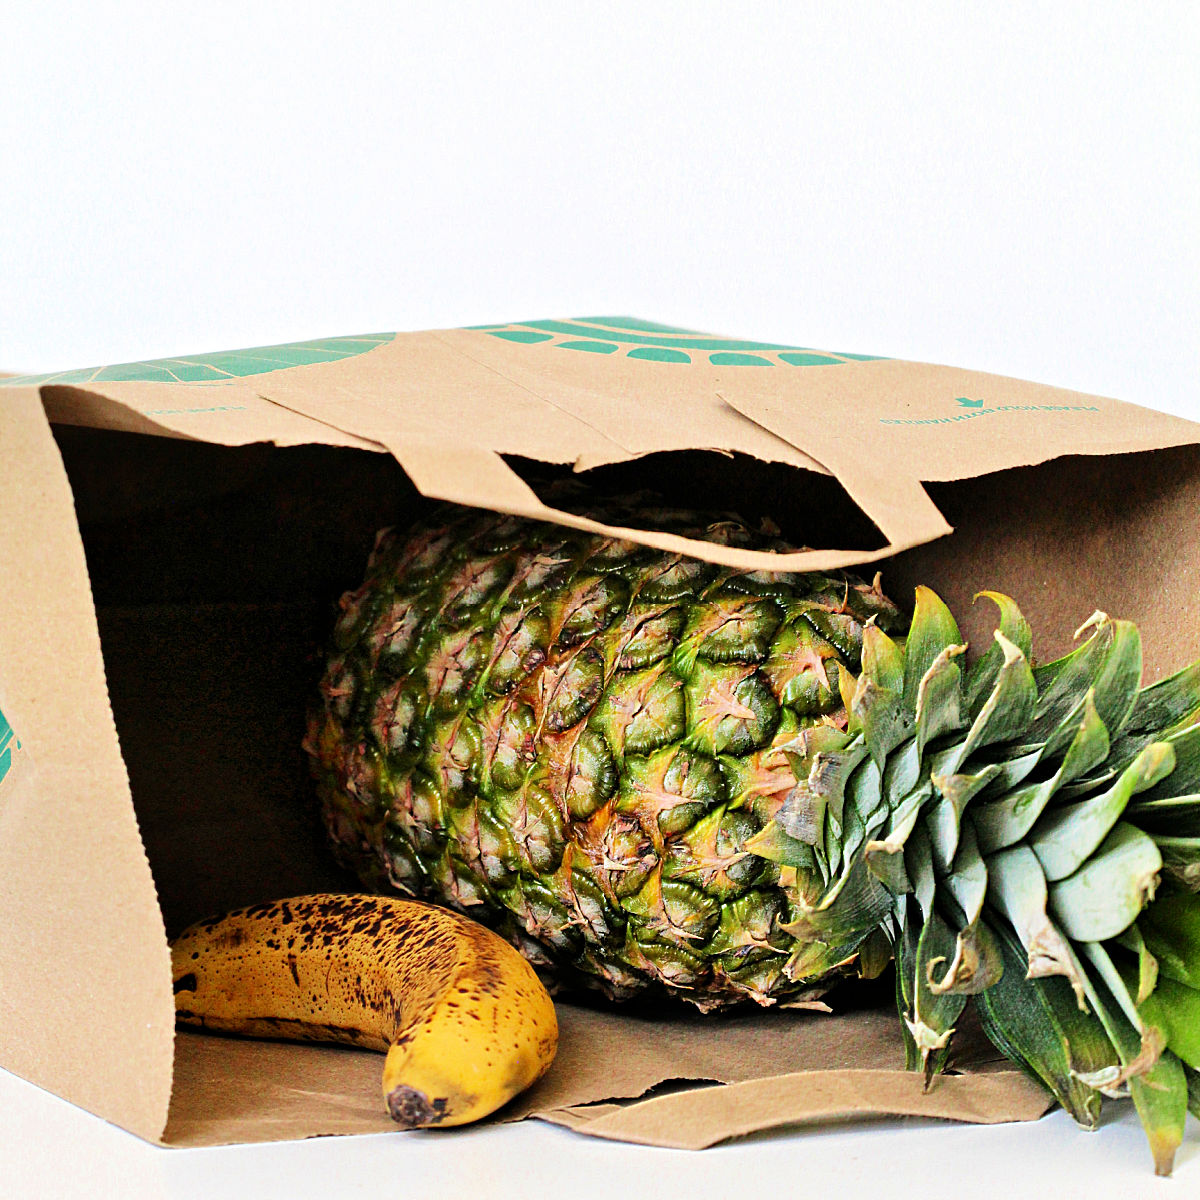 Pineapple in a paper bag with a banana.